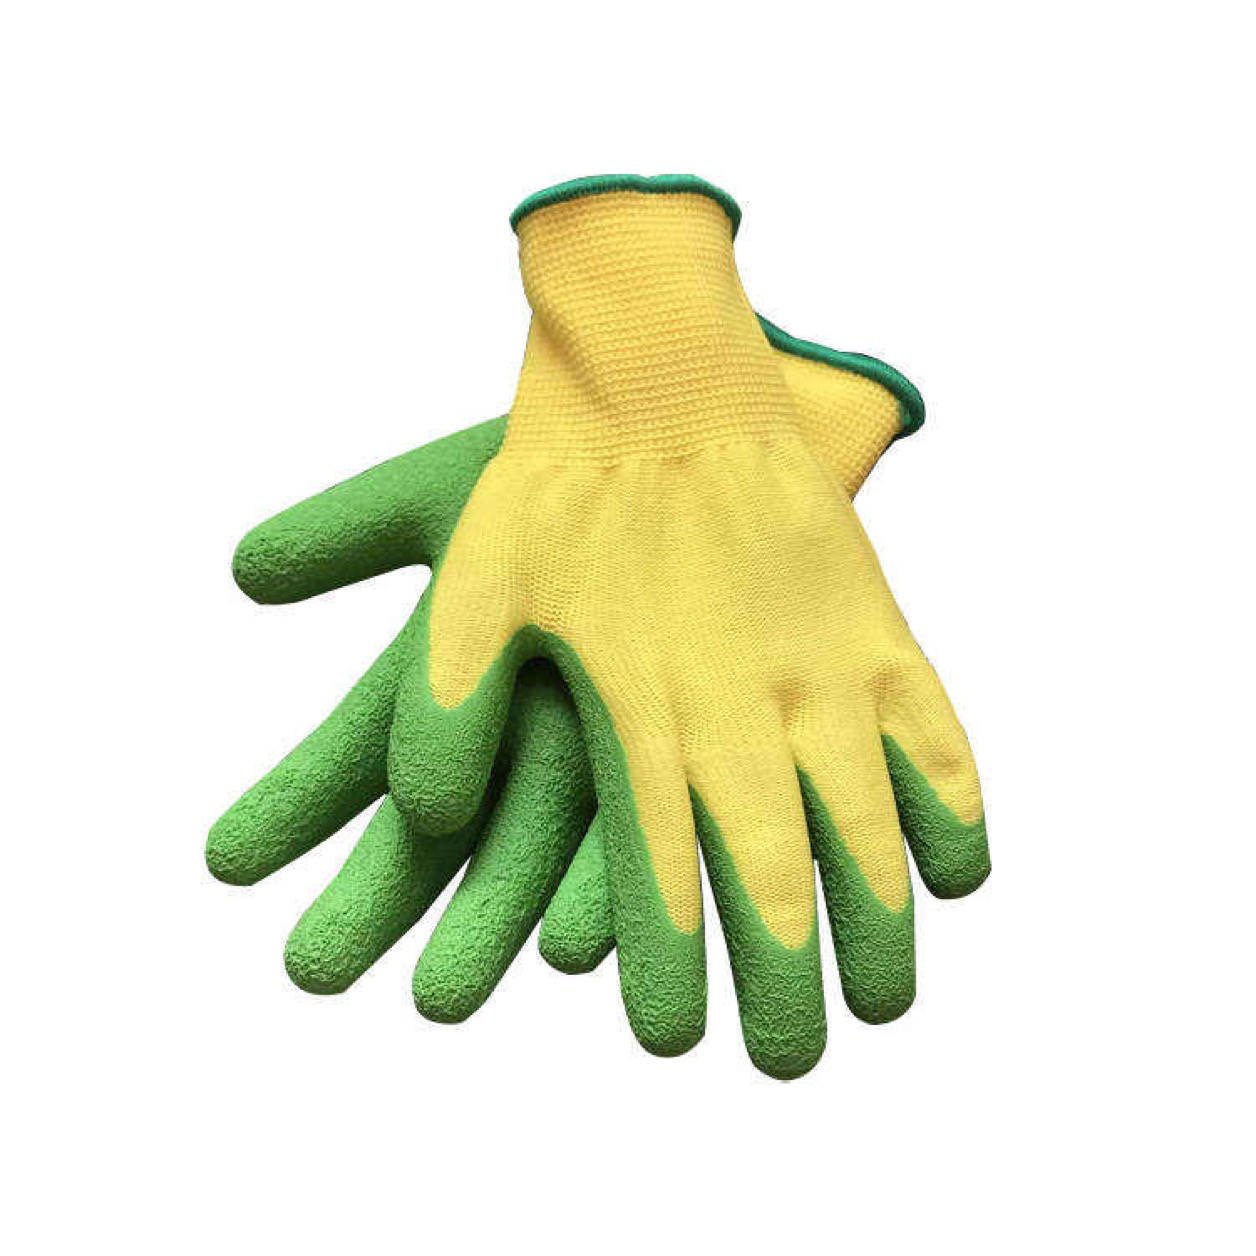 Kids protective gloves for magnet fishing